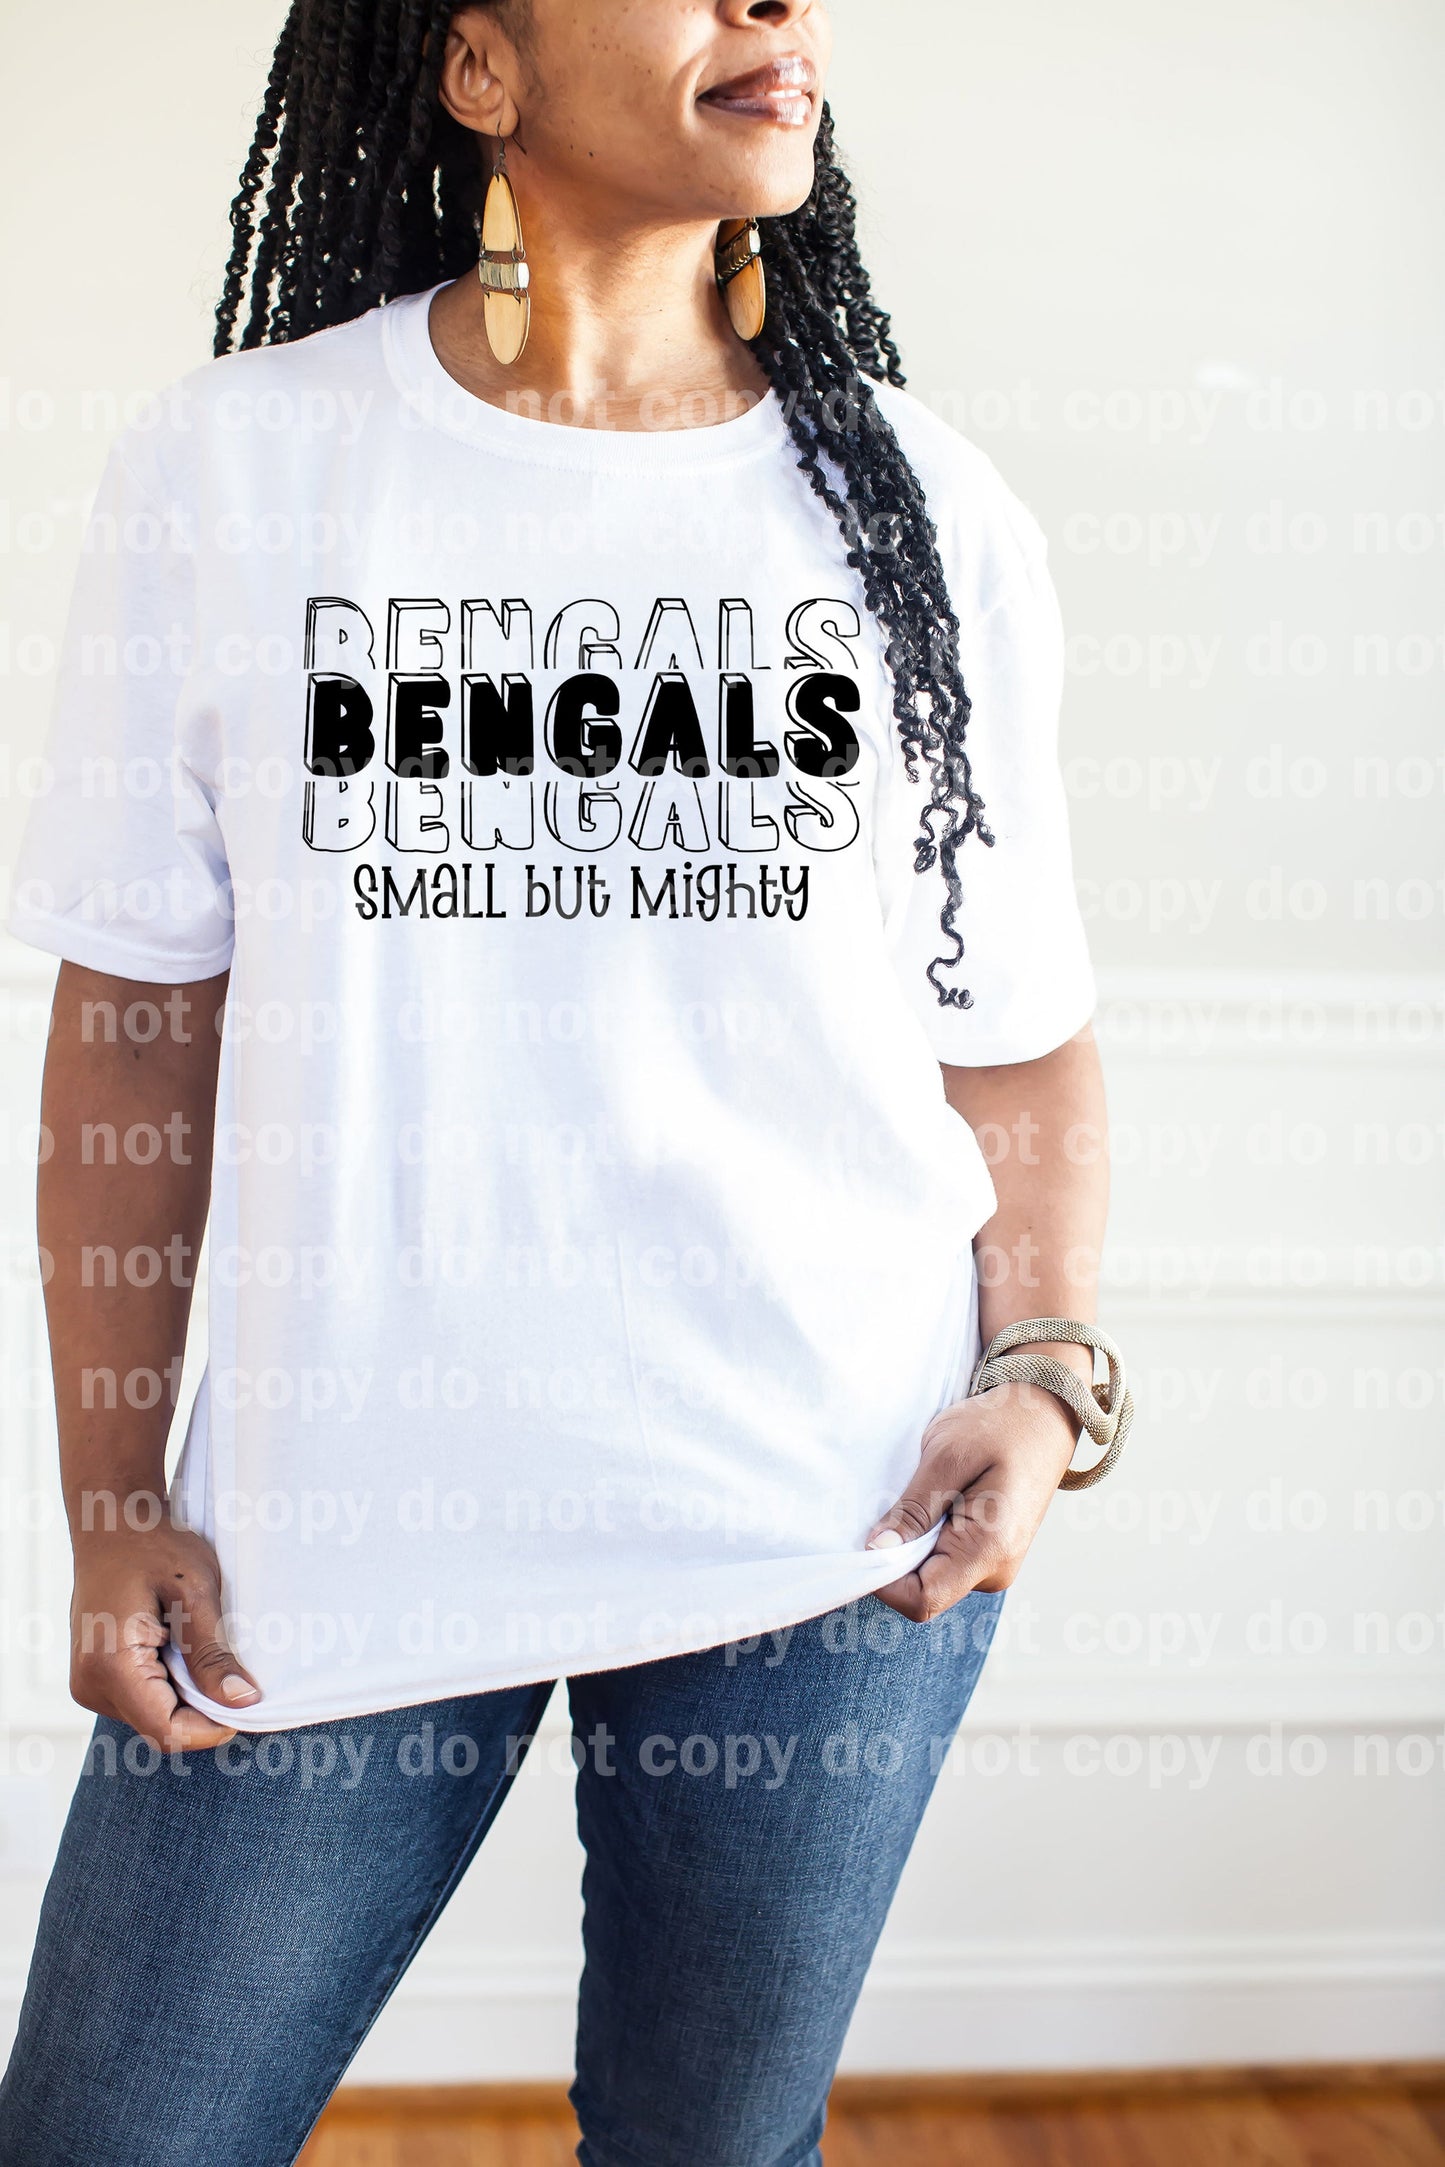 Bengals Small But Mighty Black/White Dream Print or Sublimation Print